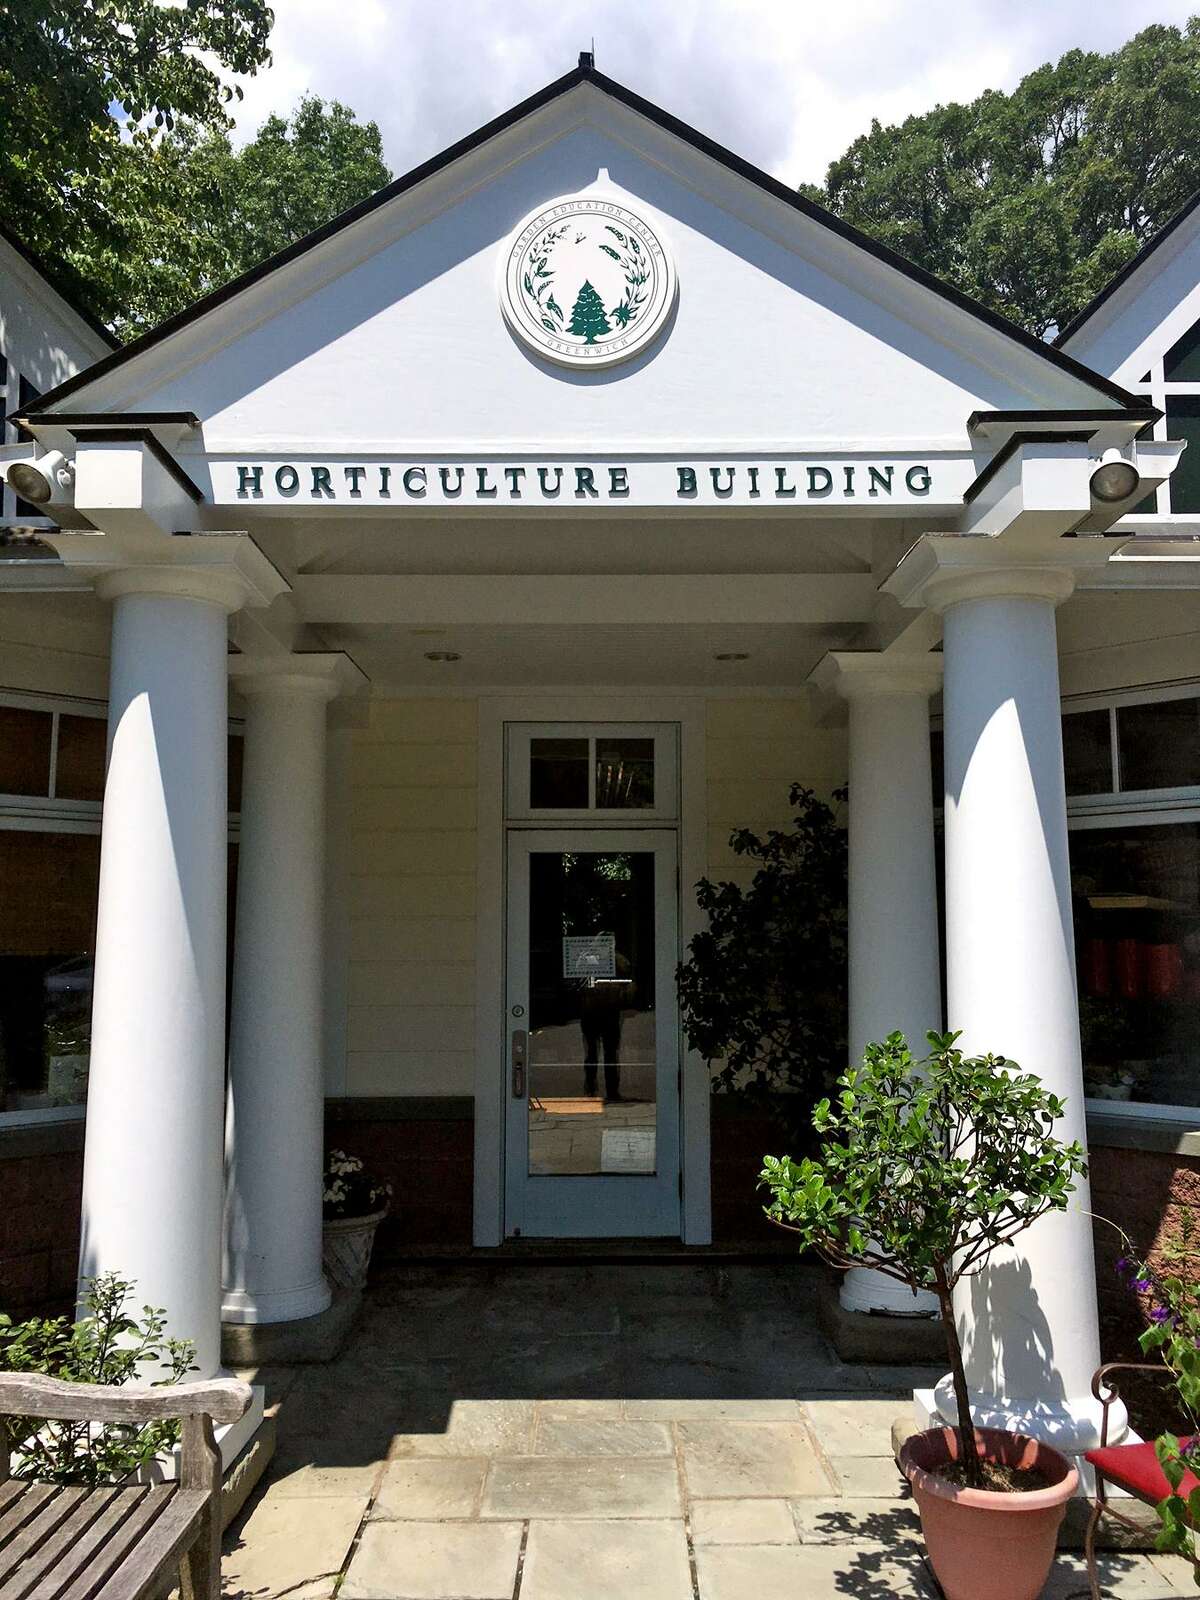 The Garden Education Center of Greenwich is re-branding itself and changing the name to Greenwich Botanical Center.